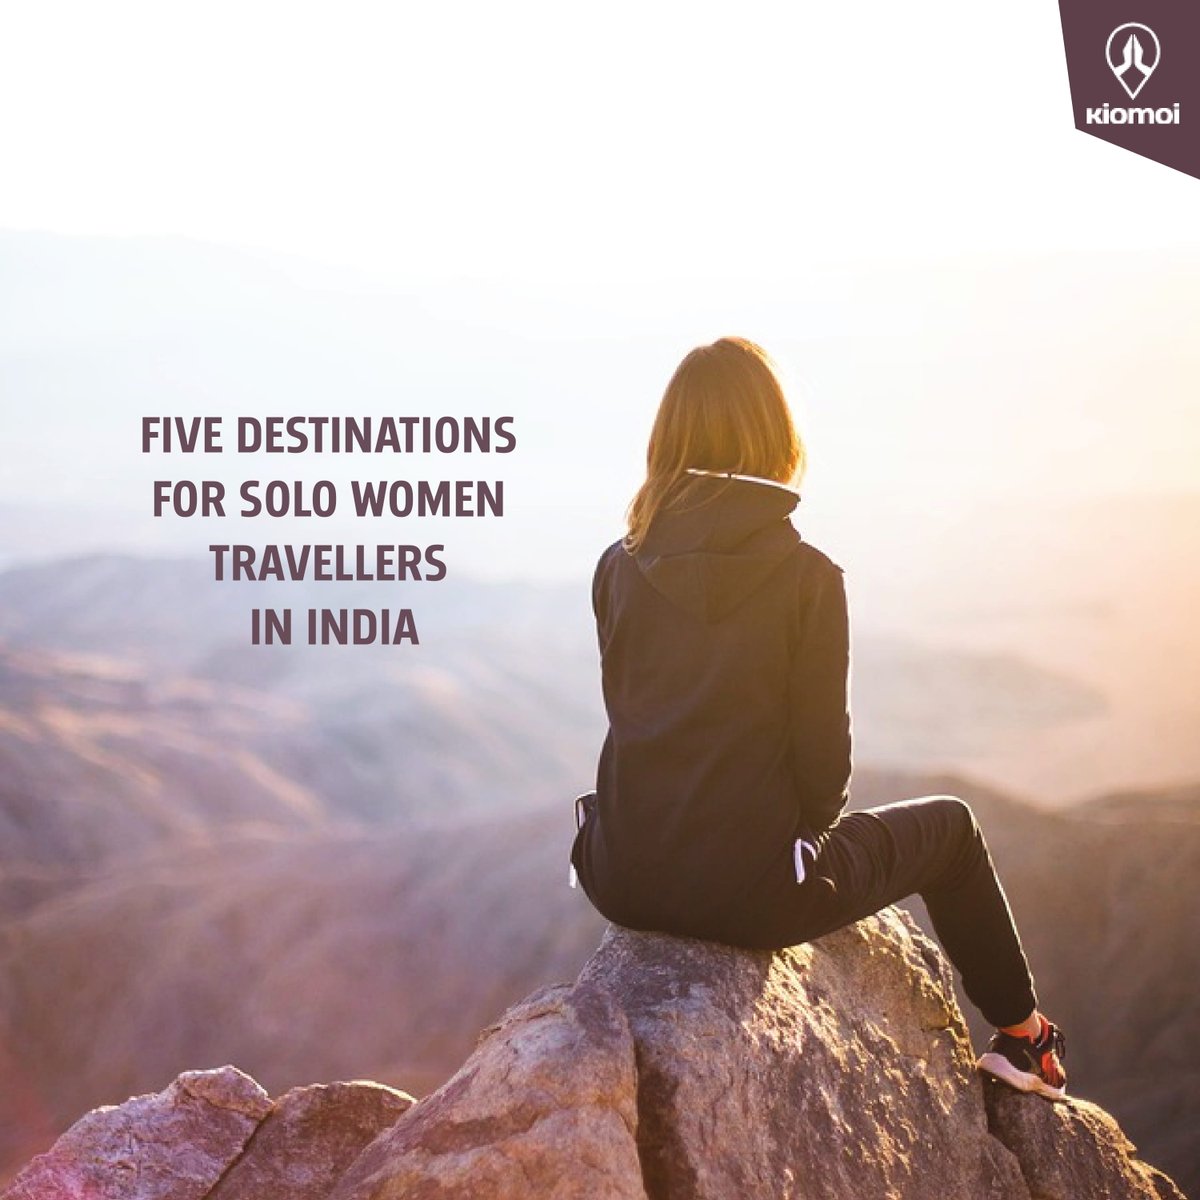 Yes! Ladies, you can go solo. Kiomoi.com is coming up with some of the best destinations in India for solo women travellers. (1/6)

@SoloWomanRV #solowomen #gosolo #travelwithkiomoi #kiomoi